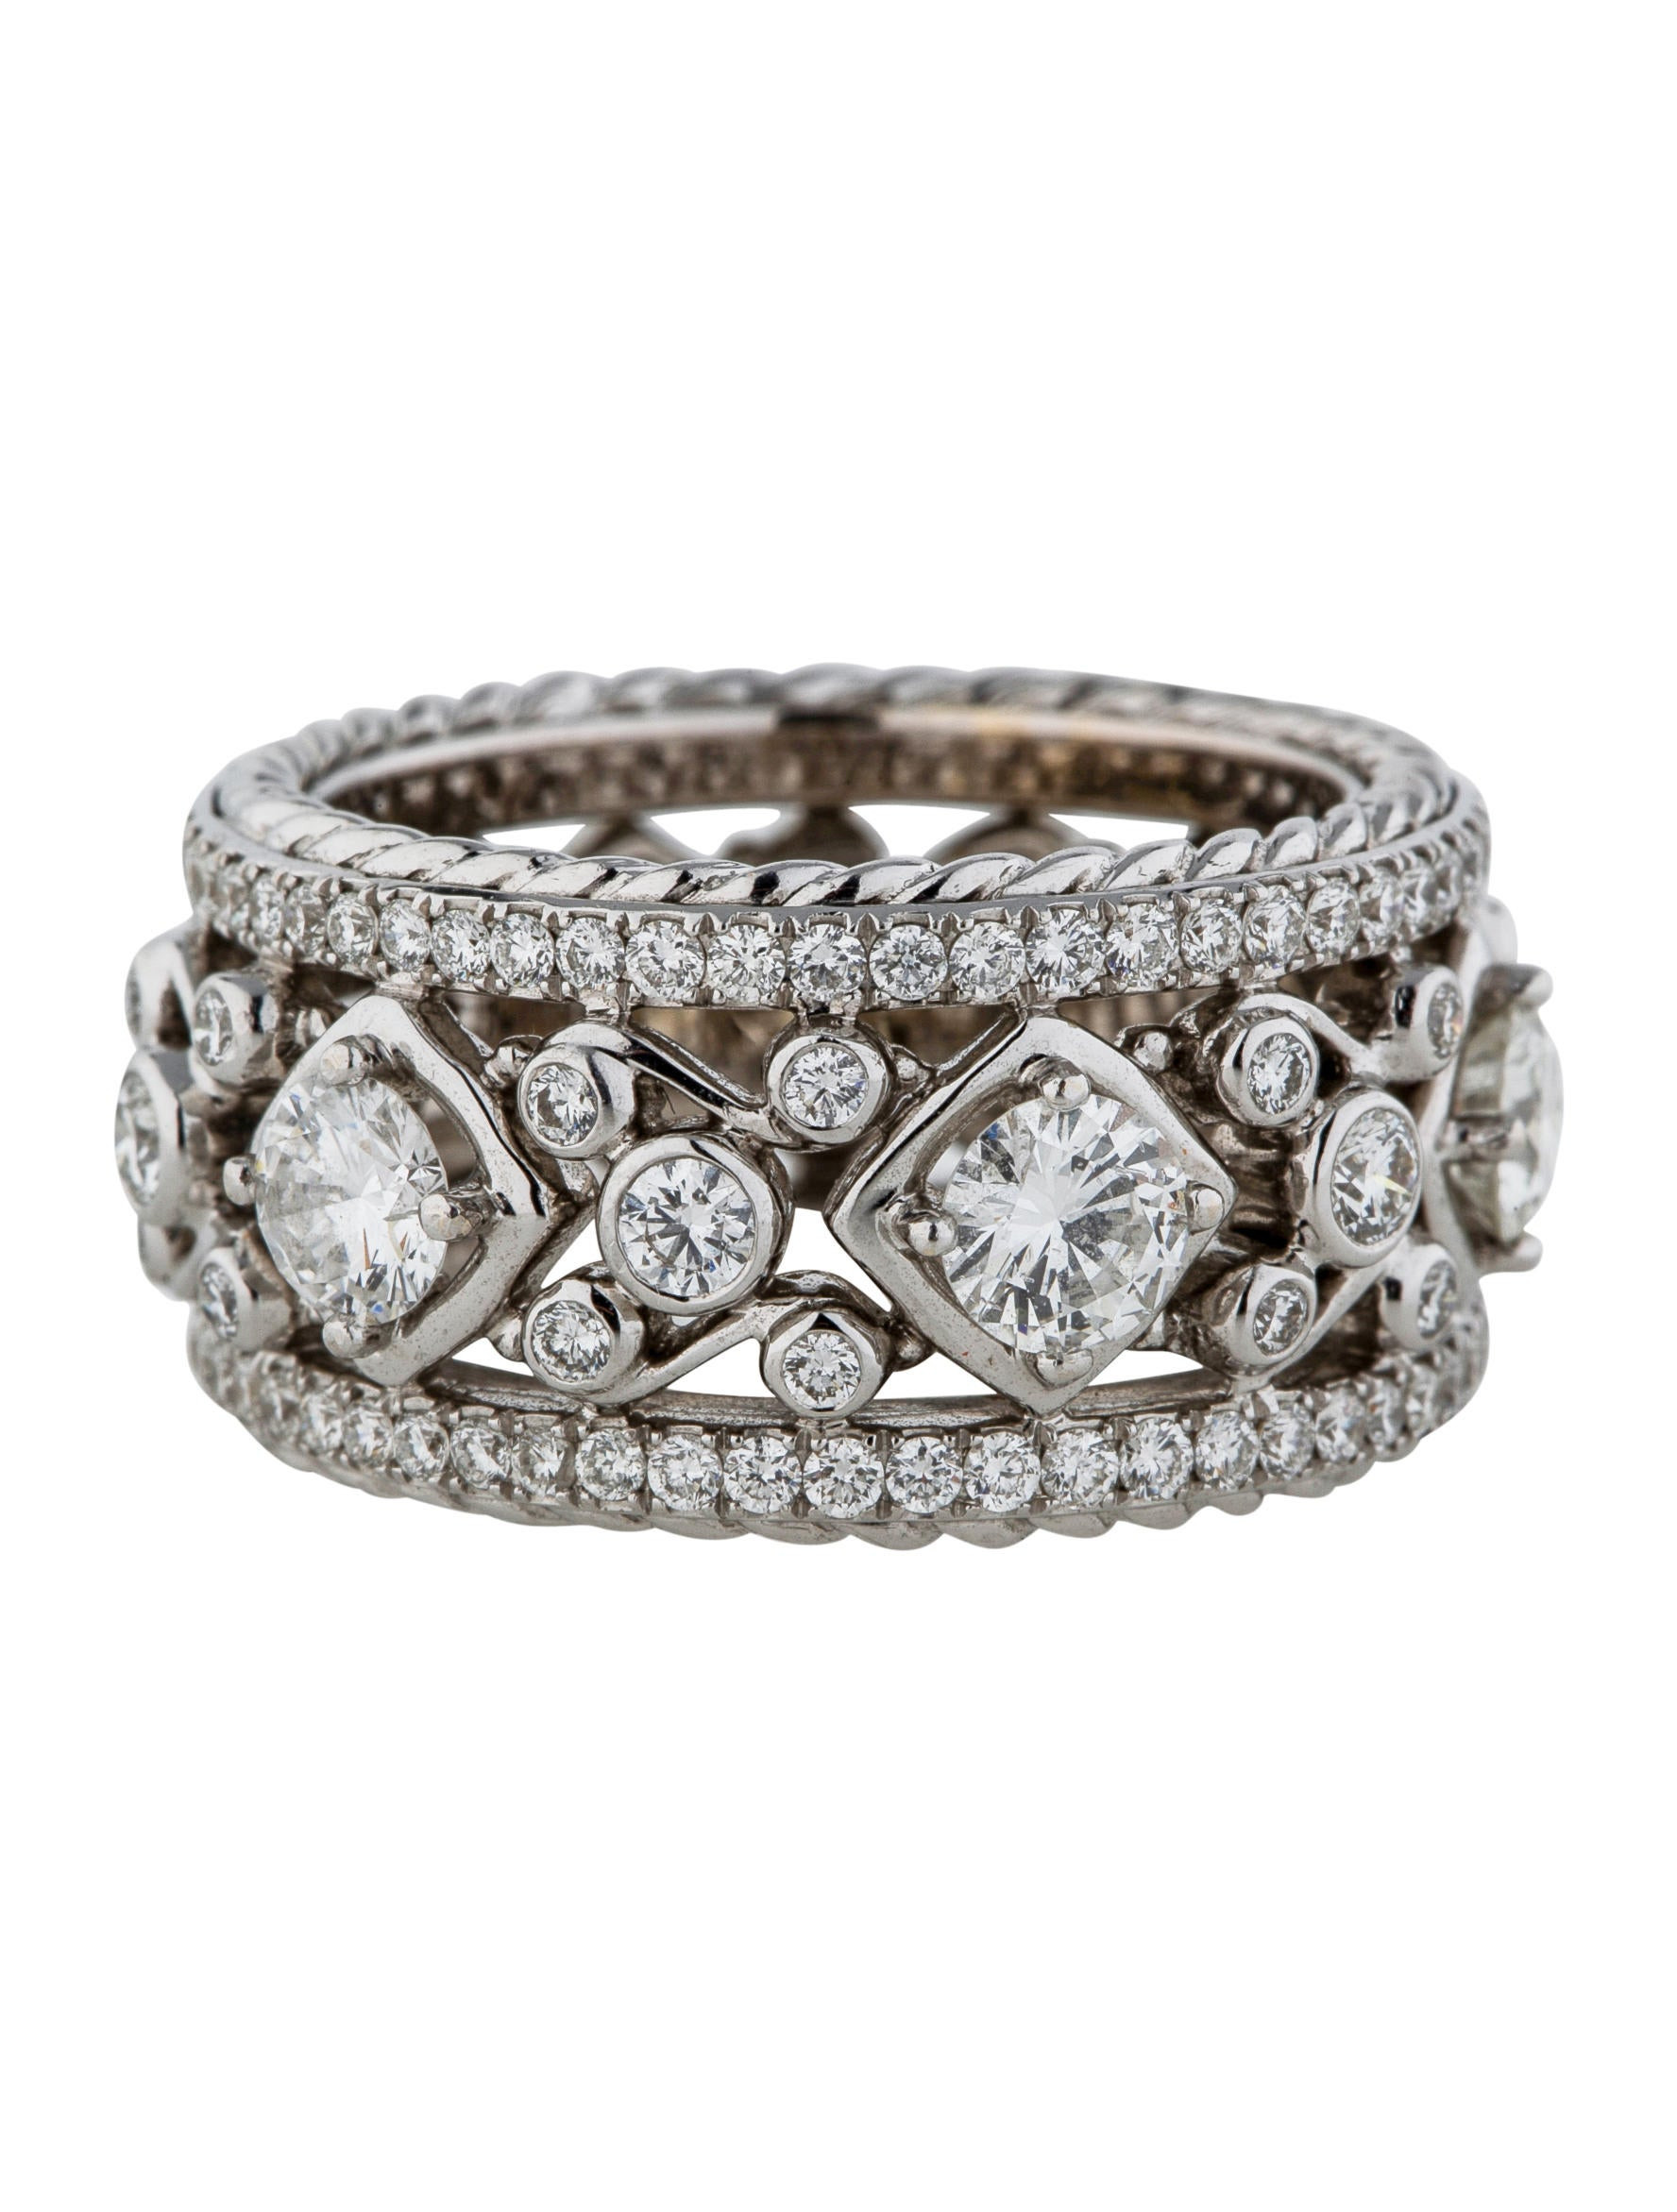 Wide Band Rings With Diamonds
 Wide Diamond Band Rings FJR